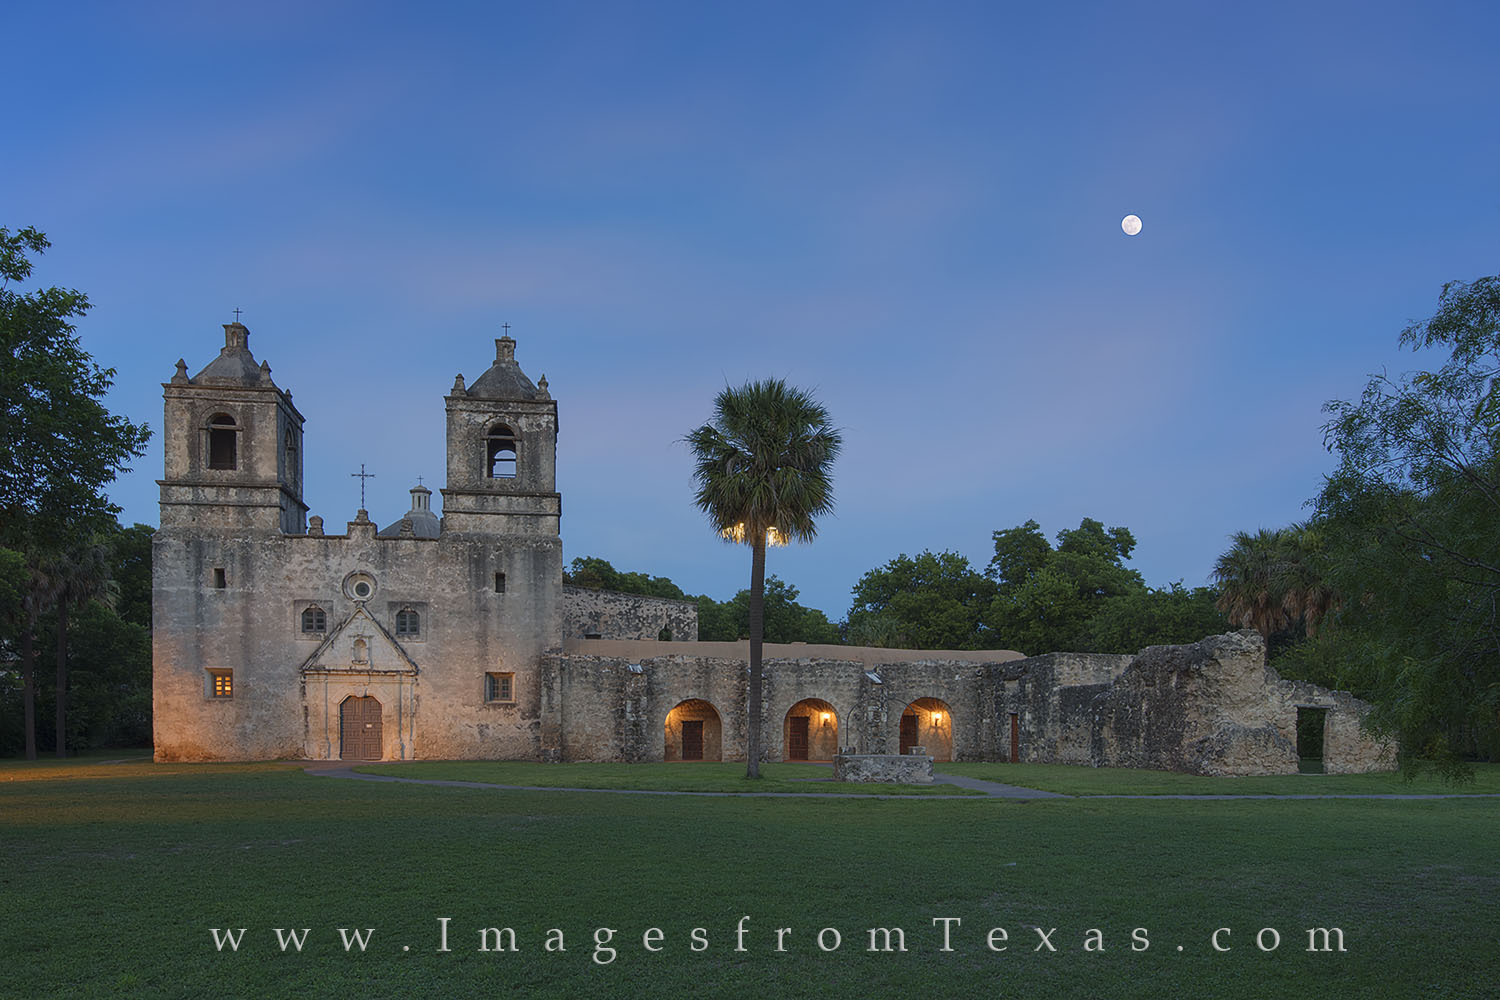 This image of Mission Concepcion, one of San Antonio's five missions that are part of the San Antonio Missions National Historic...